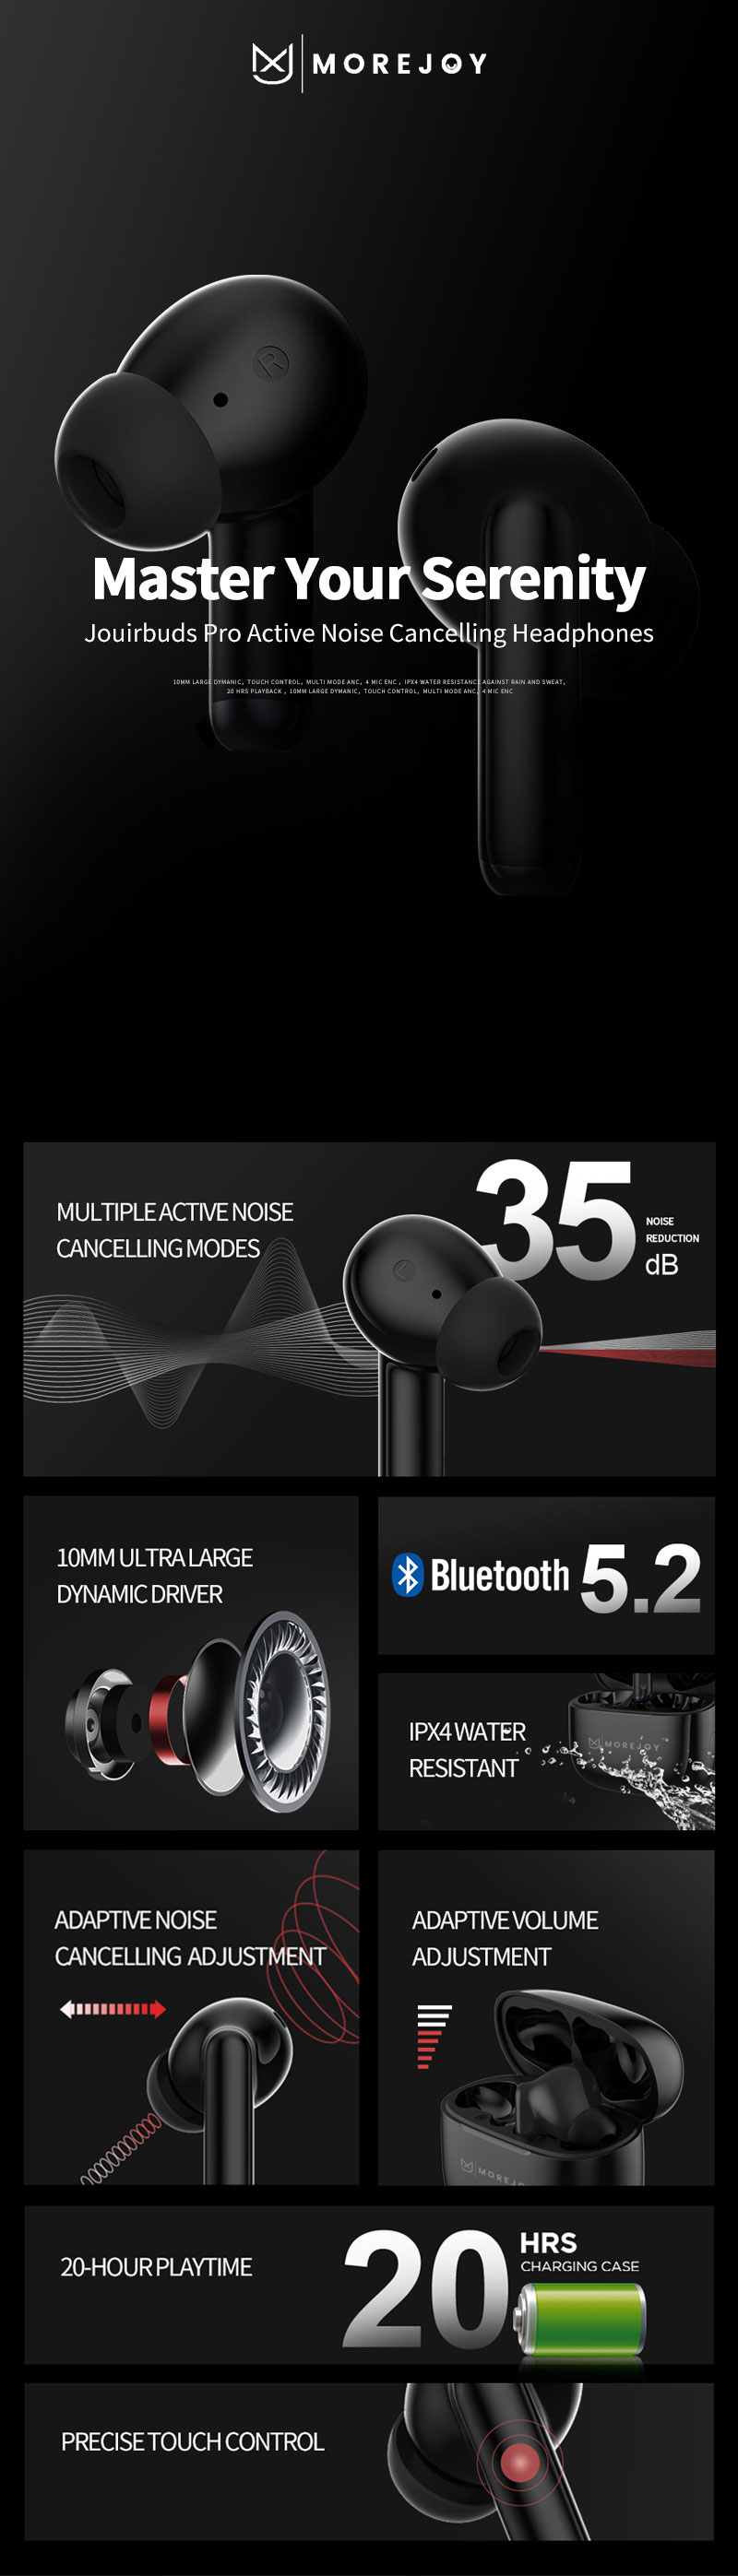 MoreJoy-MJ141Black-Jouirbuds-Pro-Hybrid-ANC-Wireless-Earbuds-Active-Noise-Cancelling-Headphones-Bluetooth-5-2-Stereo-in-Ear-Earphones-Immersive-Sound-32